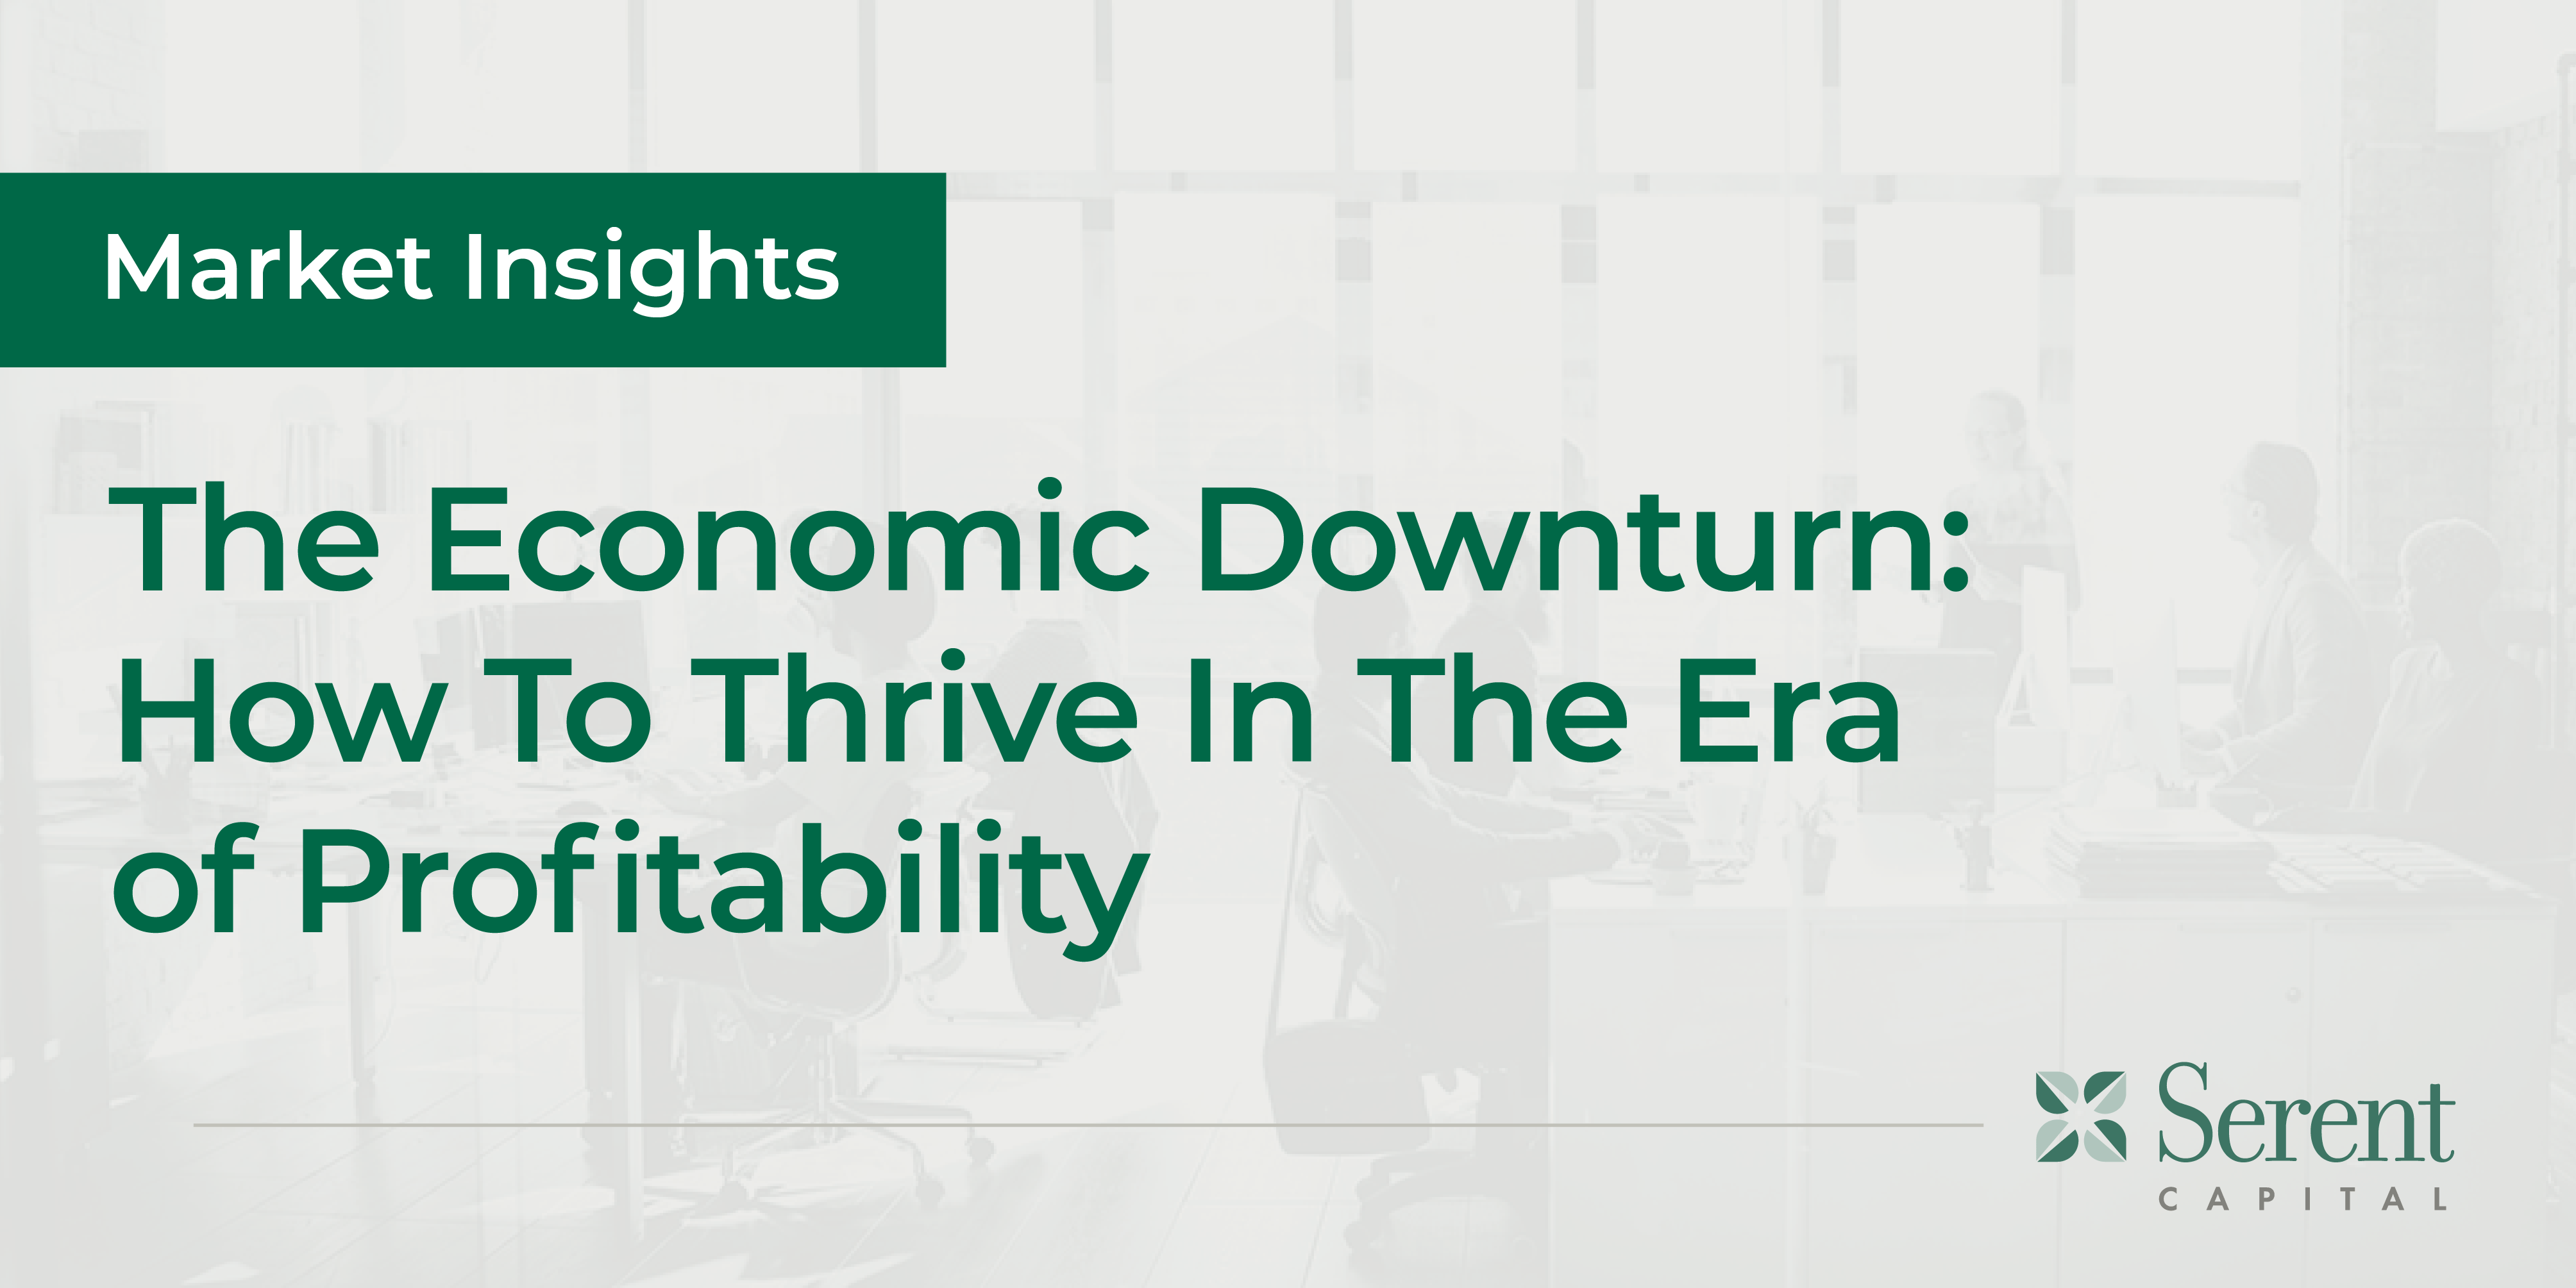 The Economic Downturn: How To Thrive In The Era of Profitability